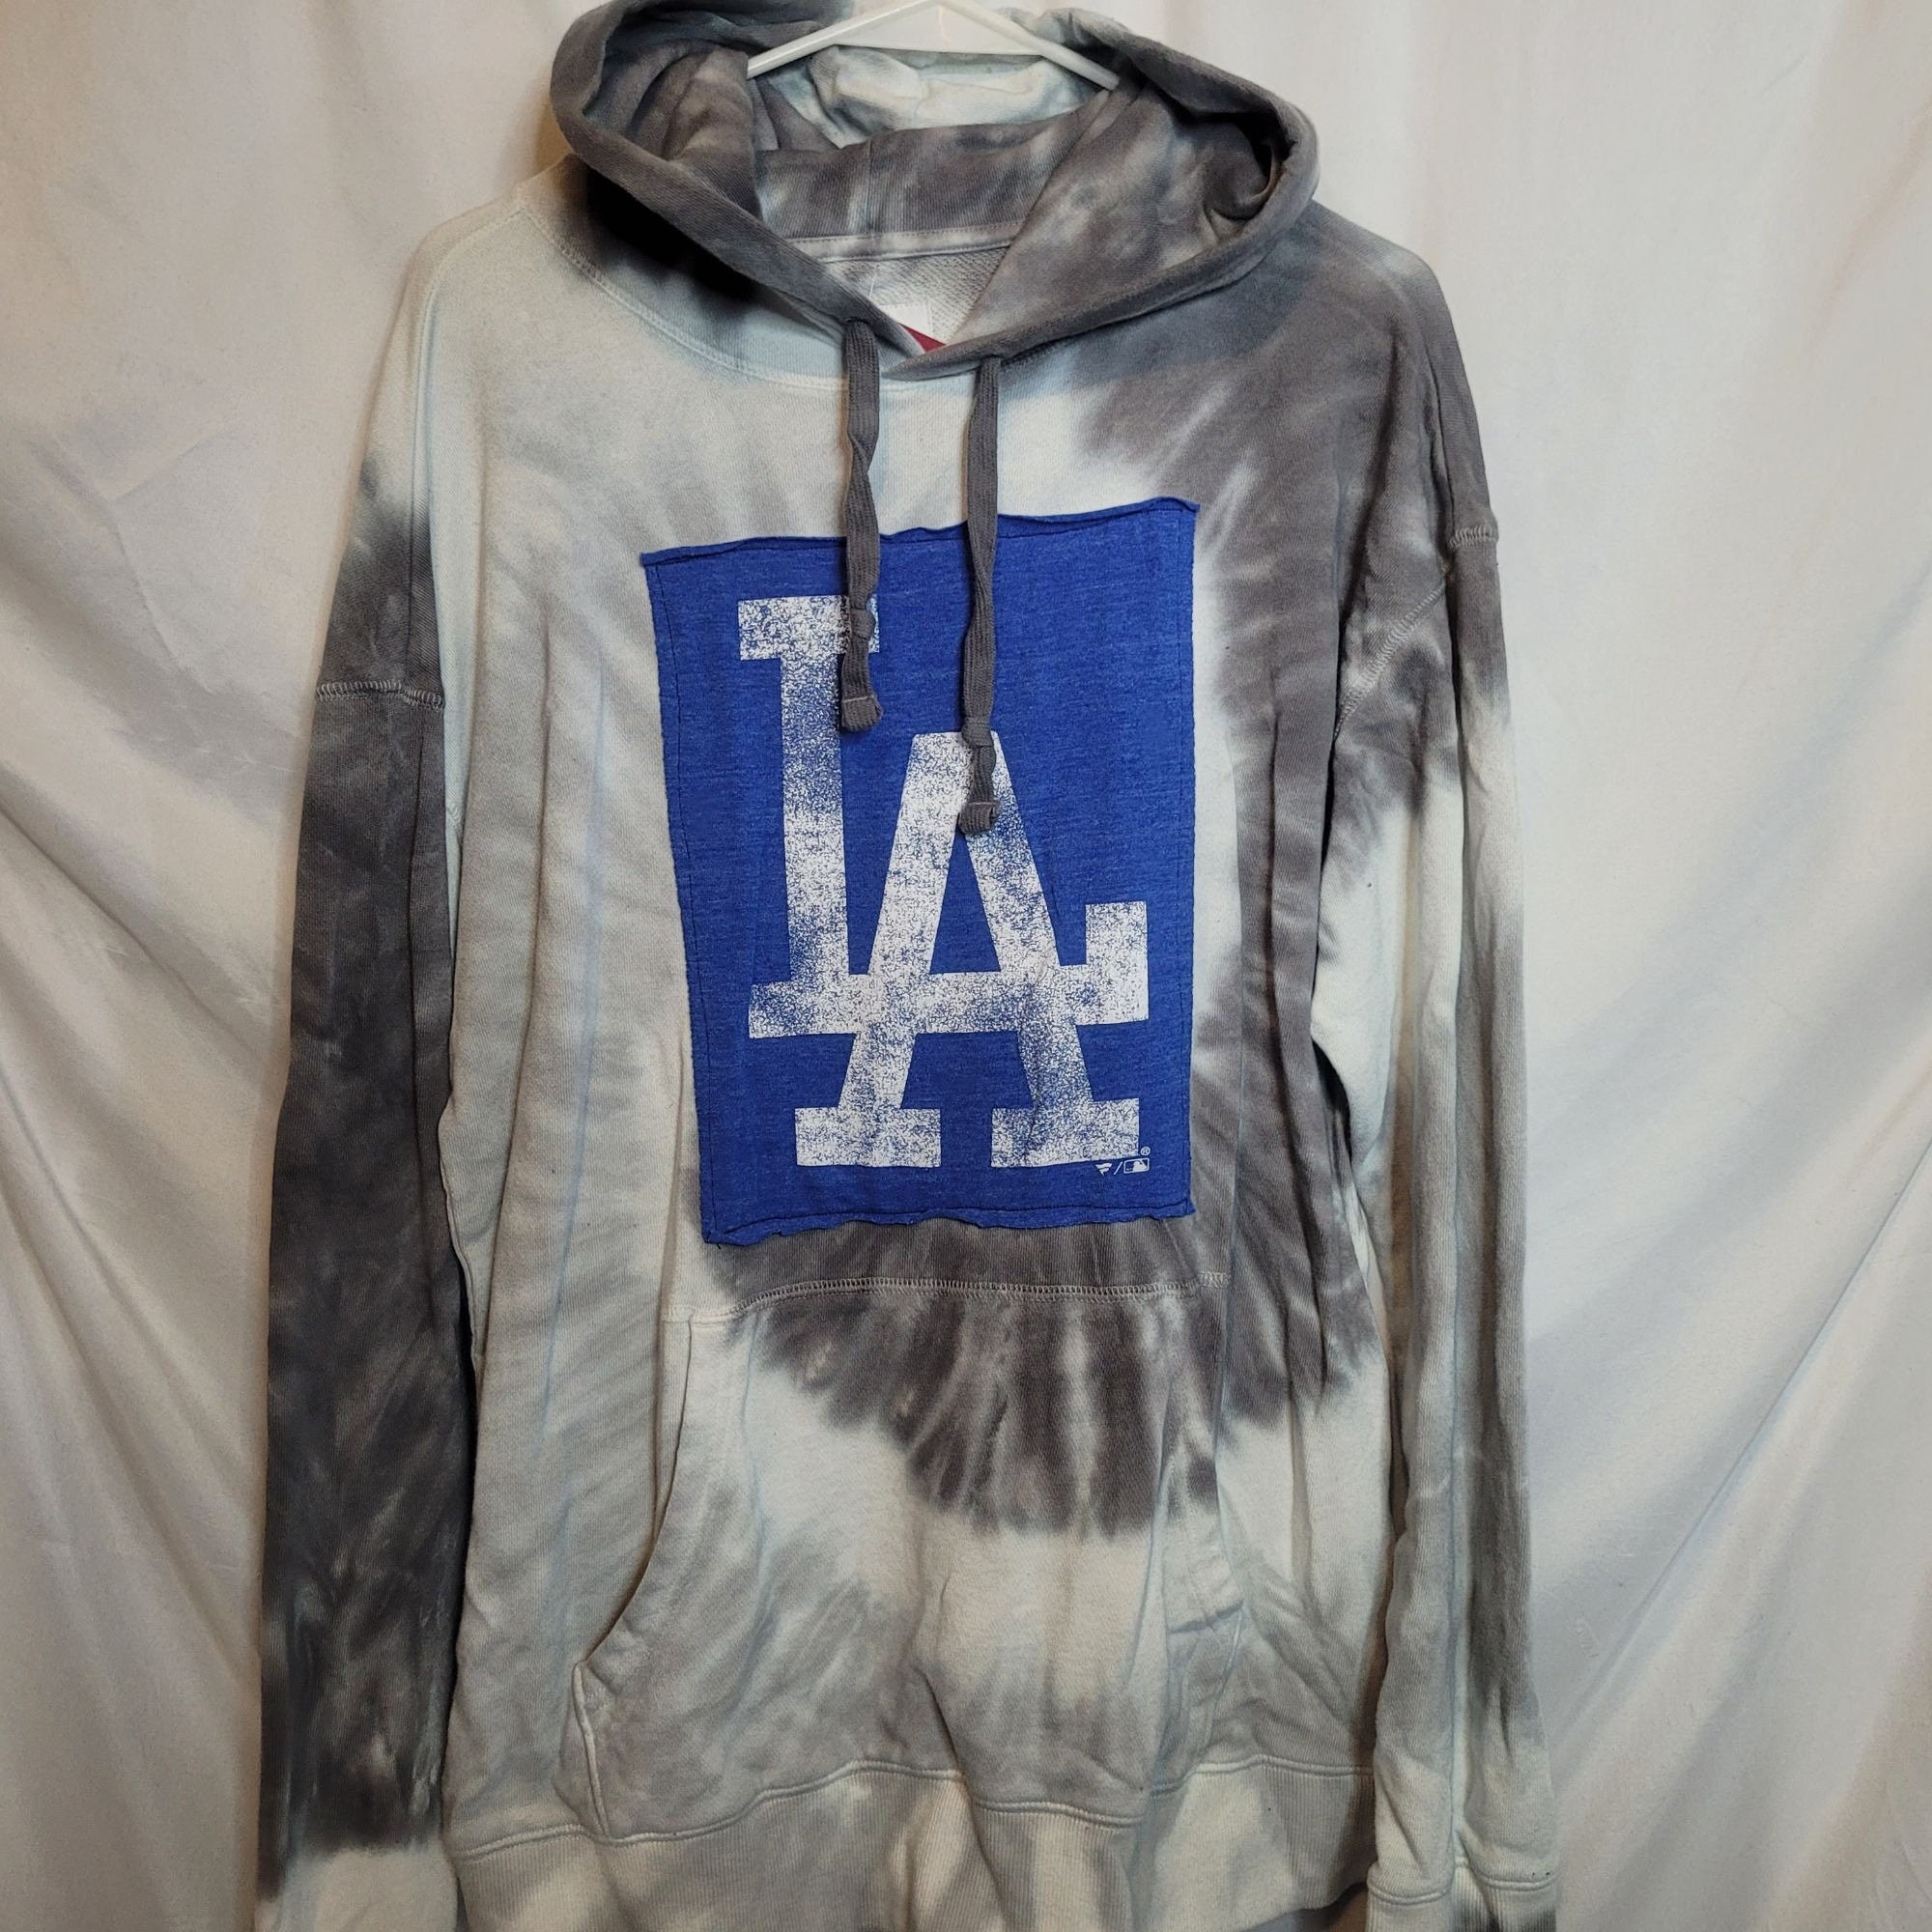 HazelThePirate One of A Kind Custom Handmade Shirt Dodgers Upcycled Hoodie Tie Dye Gray Old Navy Adult Size Small